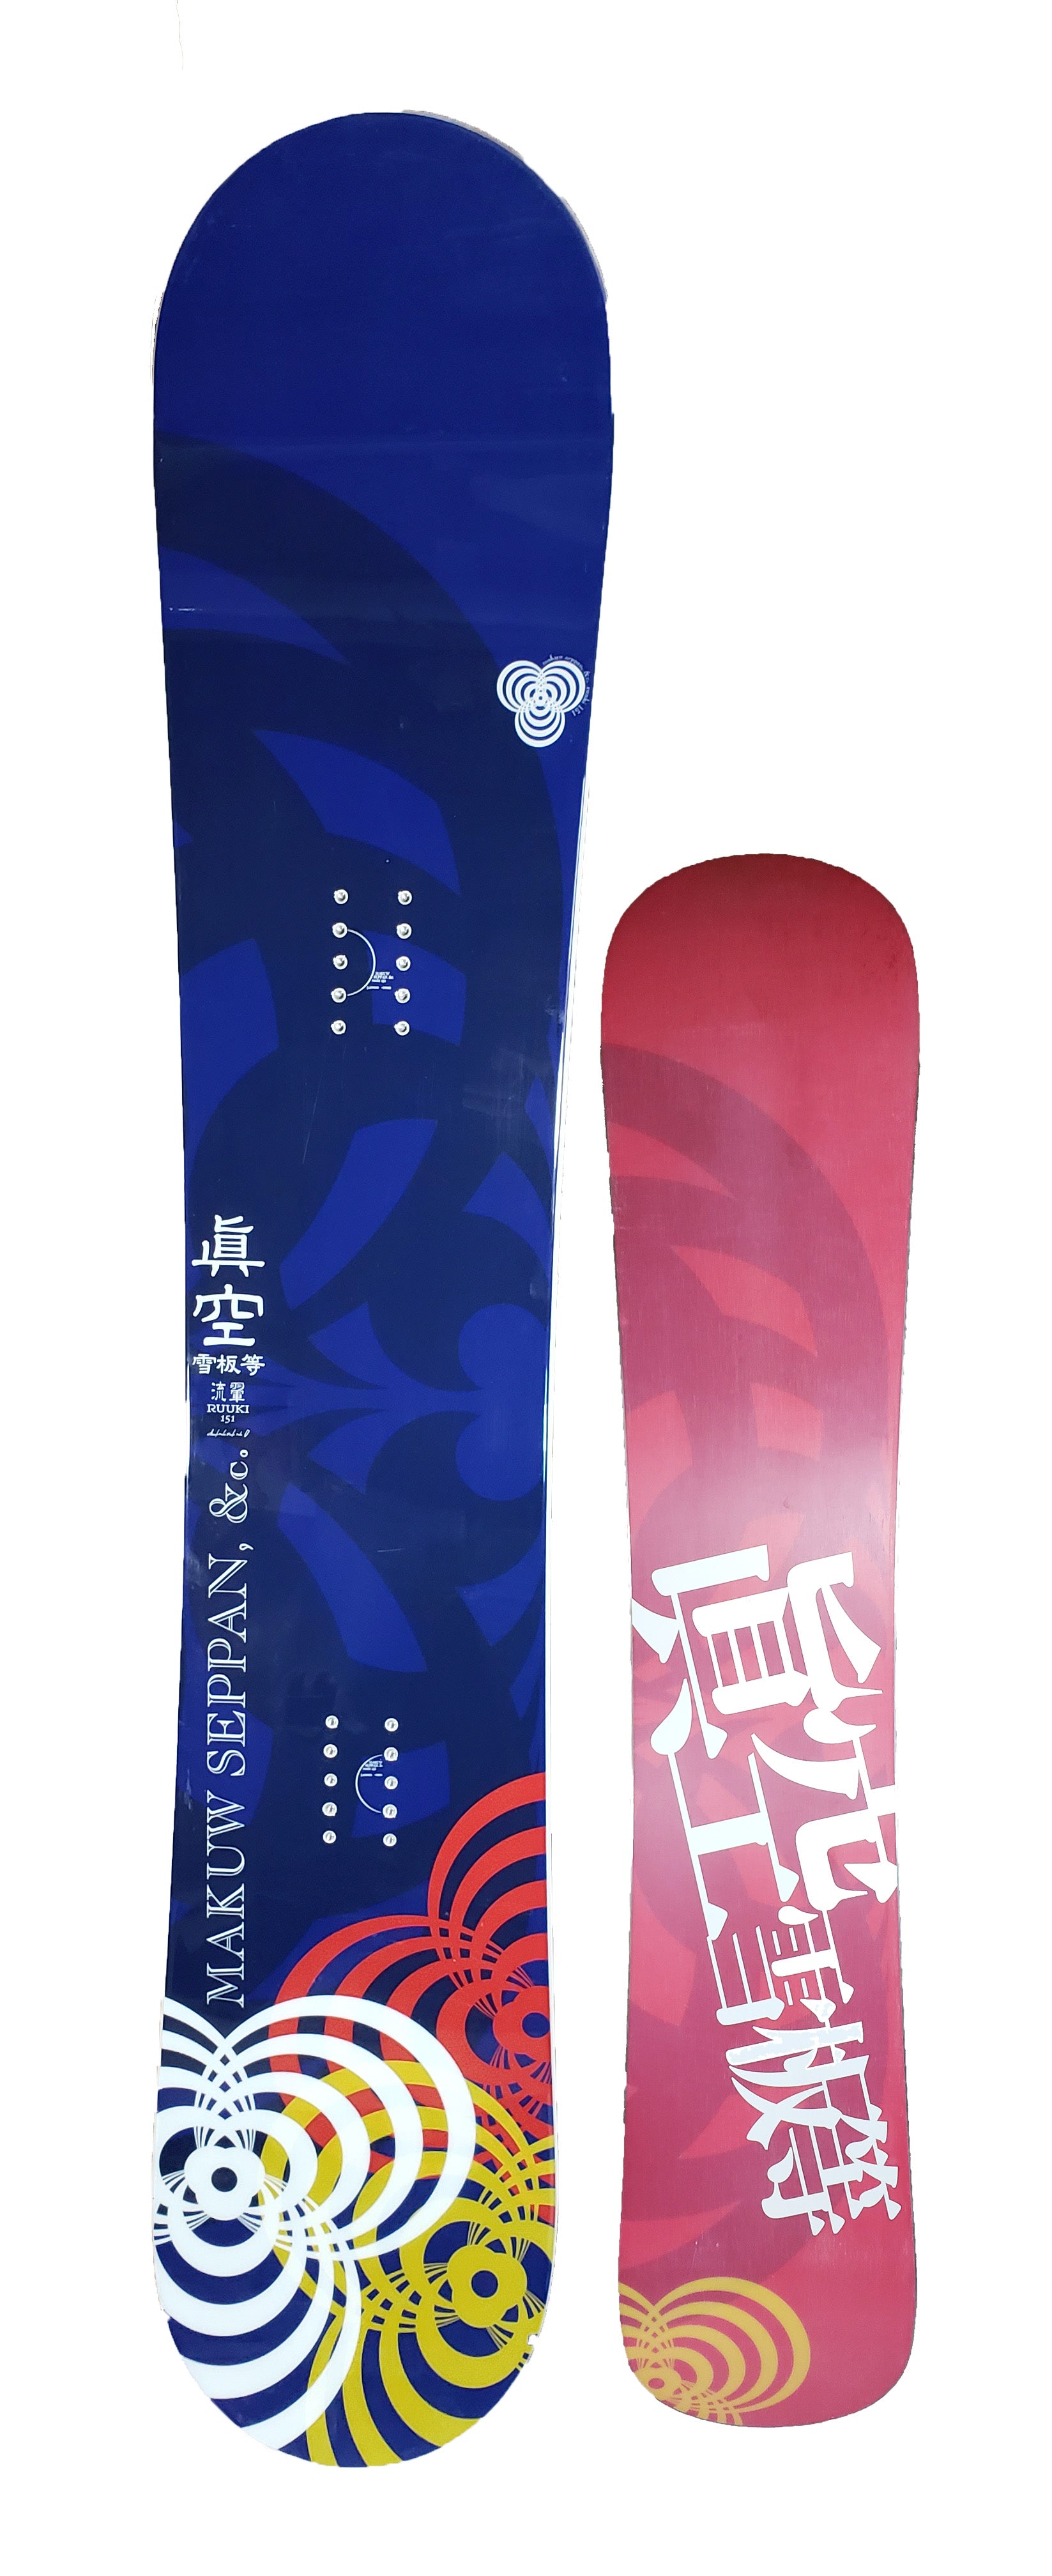 151cm Zeng Kong Makuw Seppan Ruuki Bloom Camber Snowboard, Build a Package with Boots and Bindings